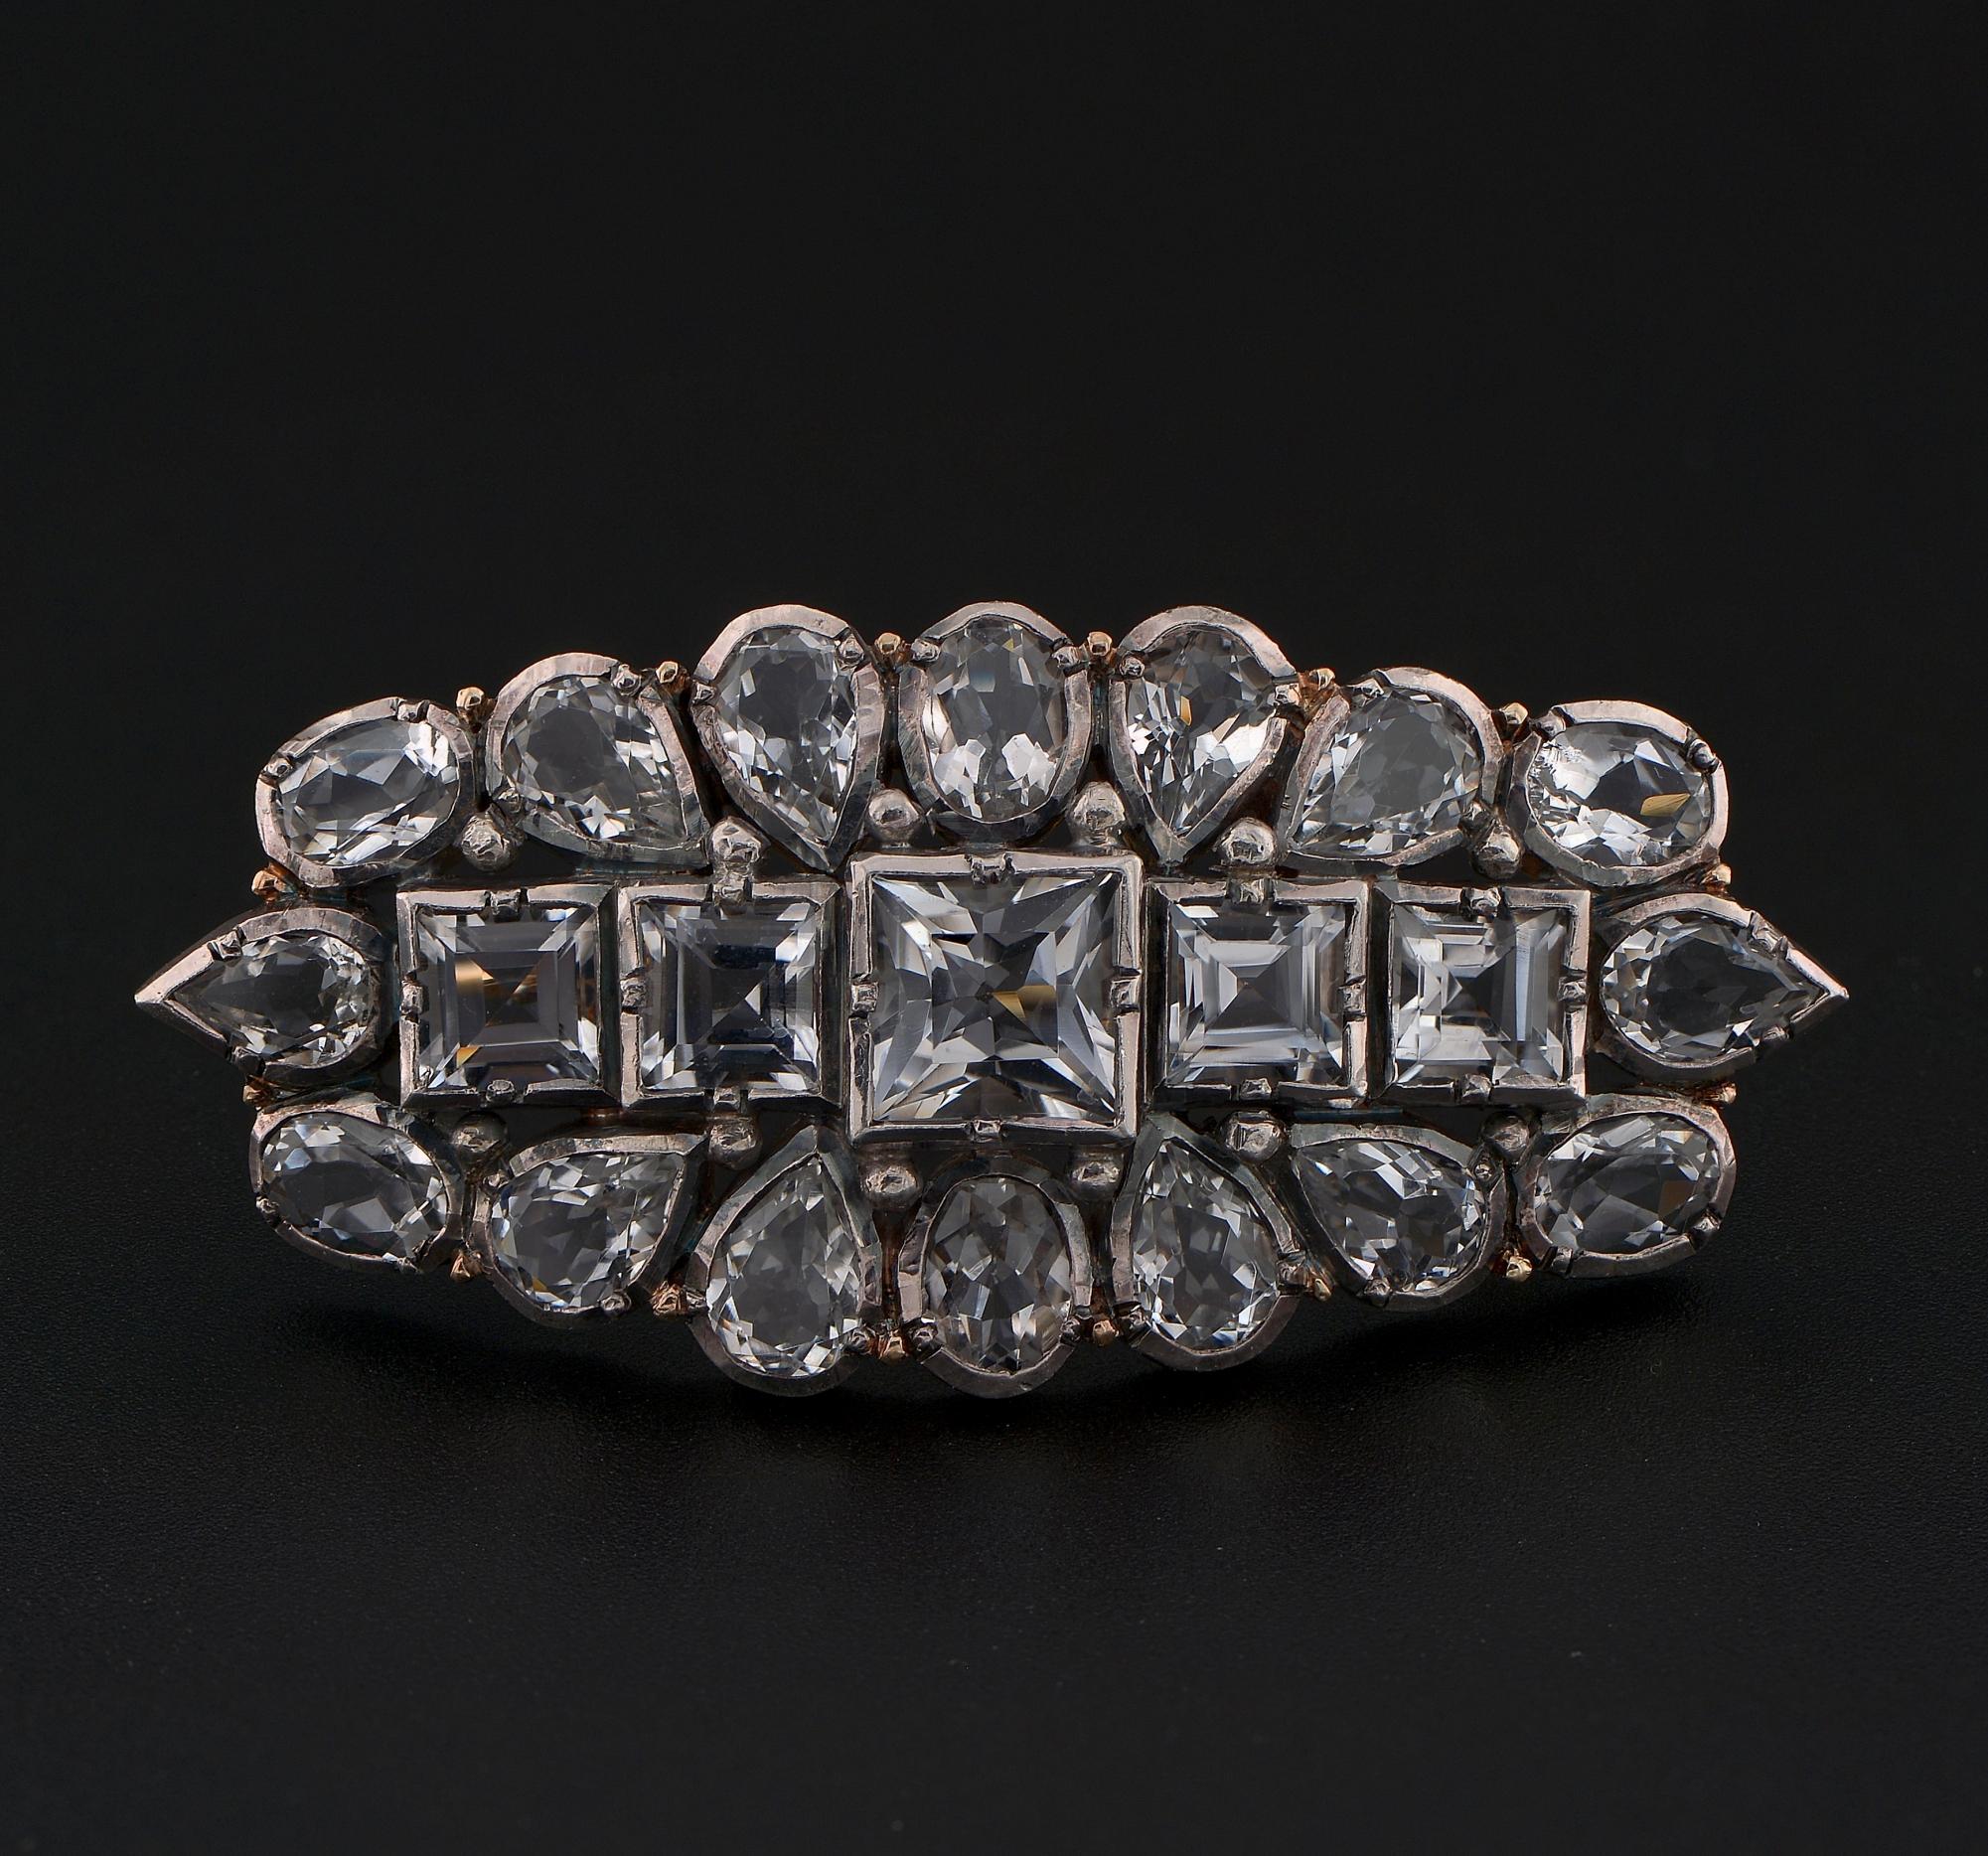 The Magic of 19th Century
This rare antique brooch is 19th Century
A master crafted piece made of solid 18 KT gold topped by silver
Extraordinary design made of rectangular body is made outstanding for the rare Rock Crystal set of various cuts and